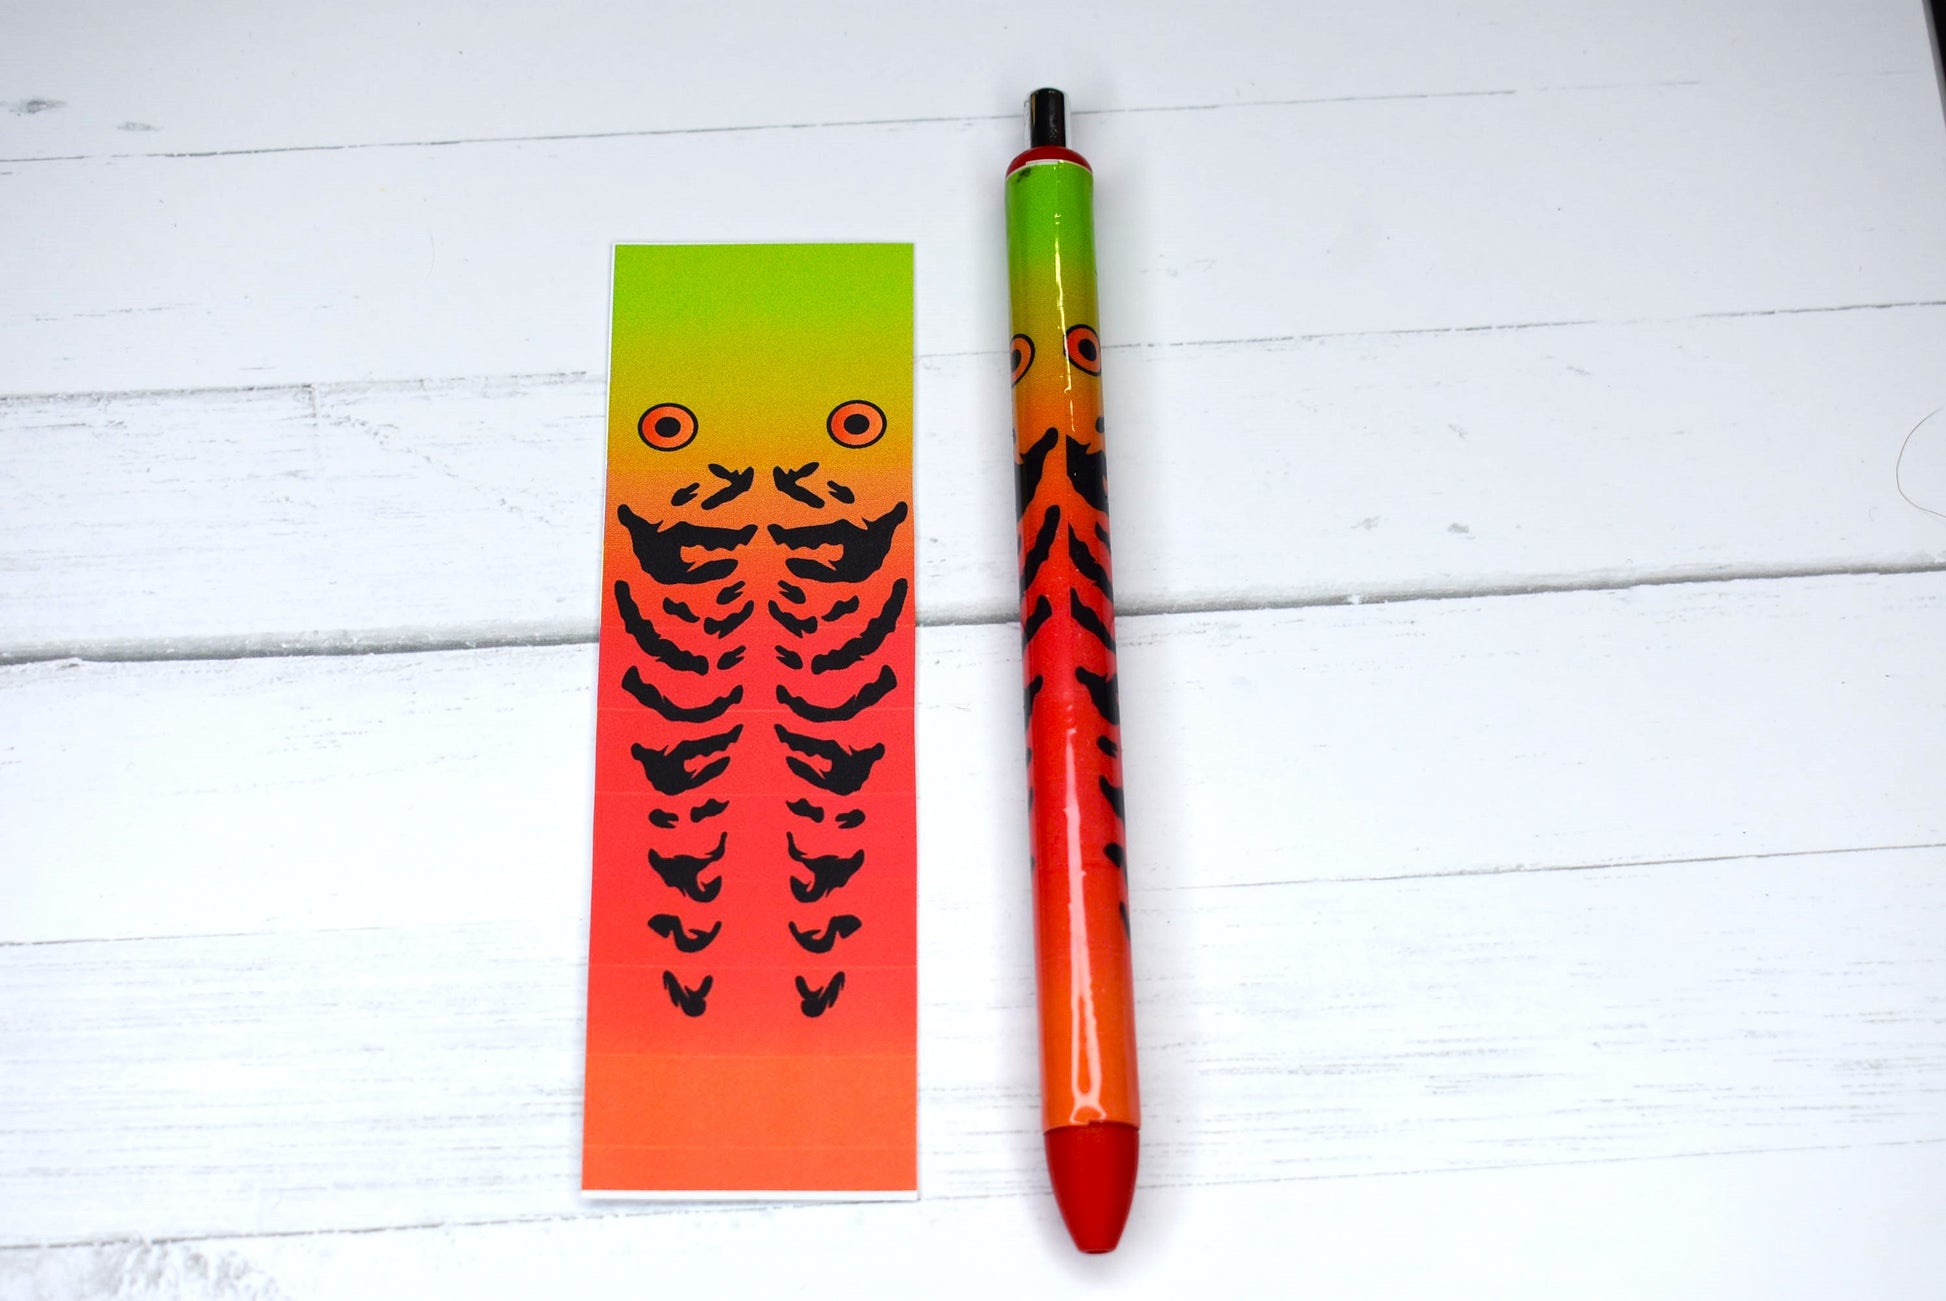 This Gel Pen boasts a durable Epoxy Resin coating and a vivid Tiger Shad fishing lure image with red ink. It comes with an additional black ink refill.